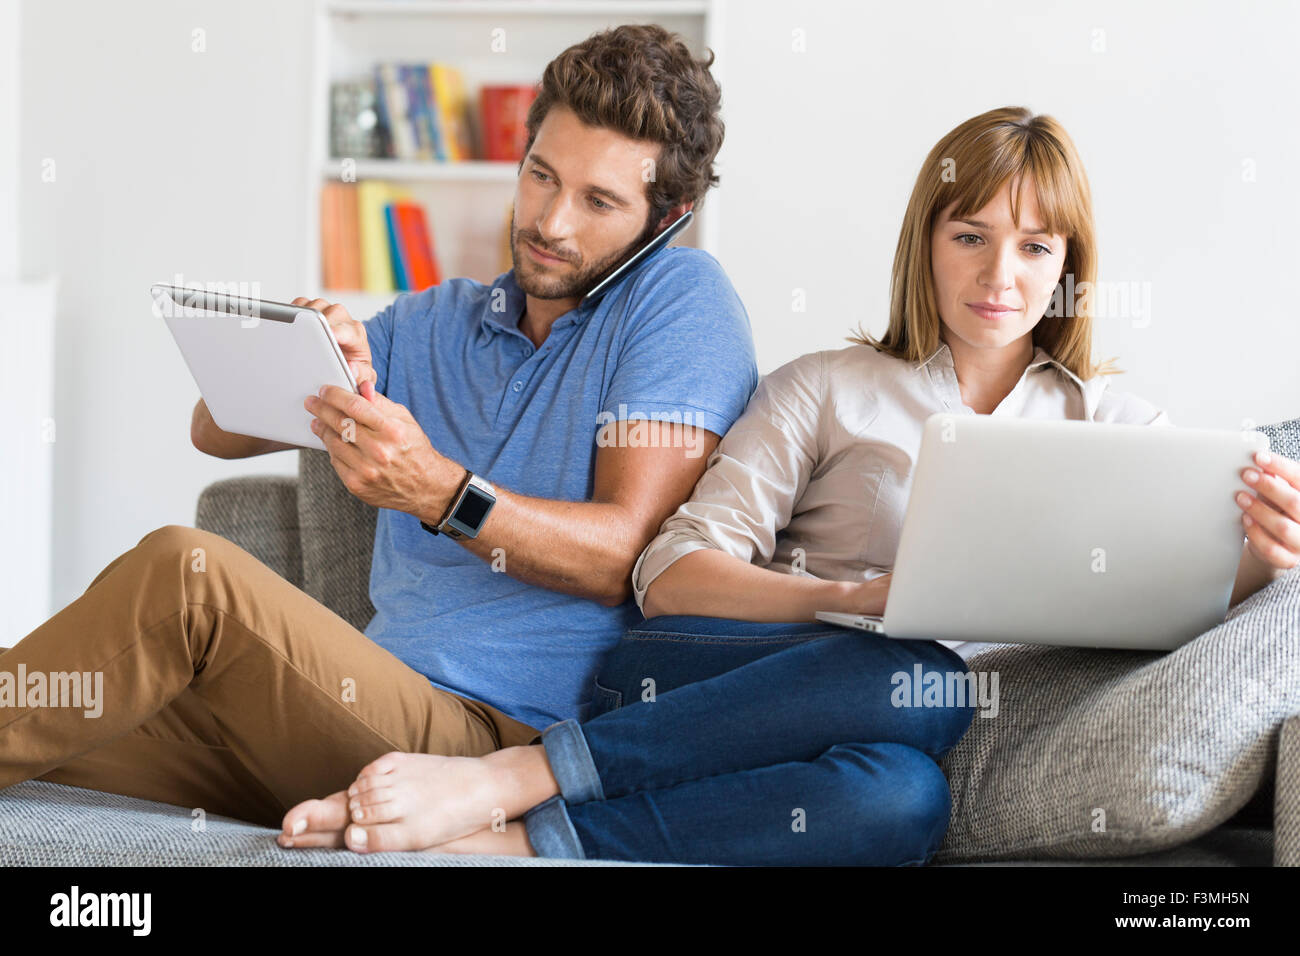 Digital geek couple. Mobile phone, smartwatch, tablet. Modern white apartment Stock Photo